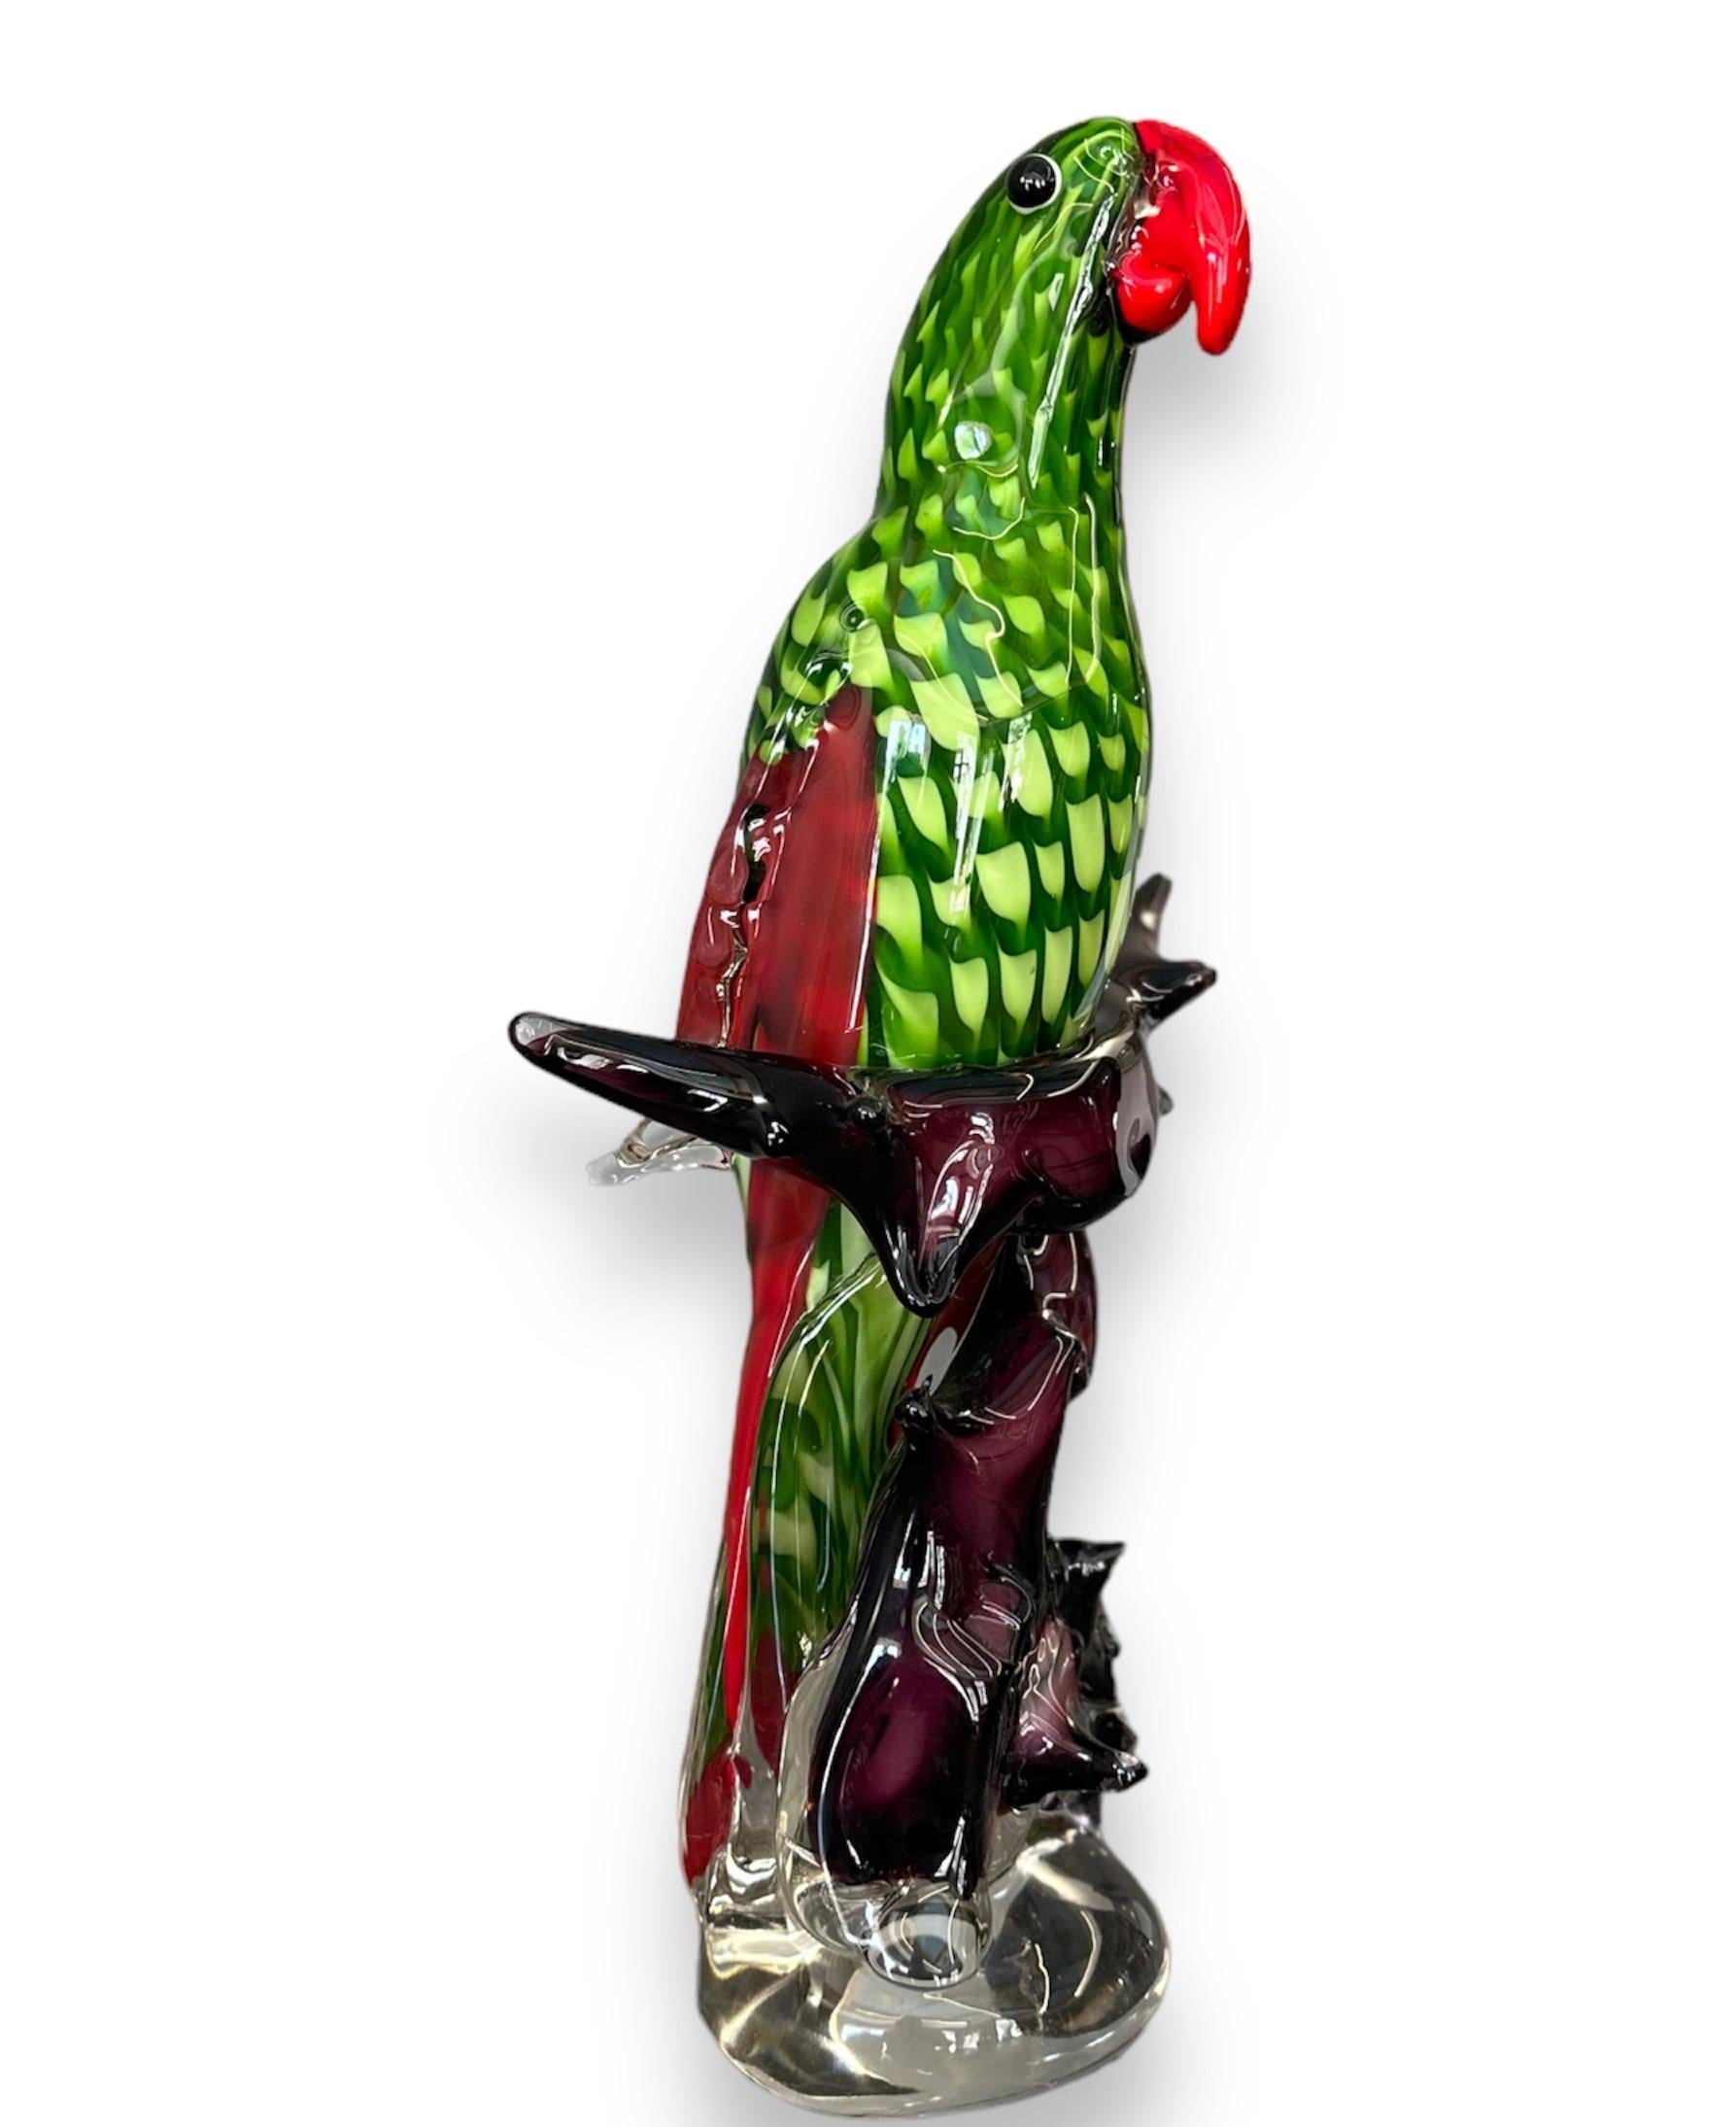 Murano glass sculpture depicting parrot.

Italy - 1970s

Measurements: H 50 